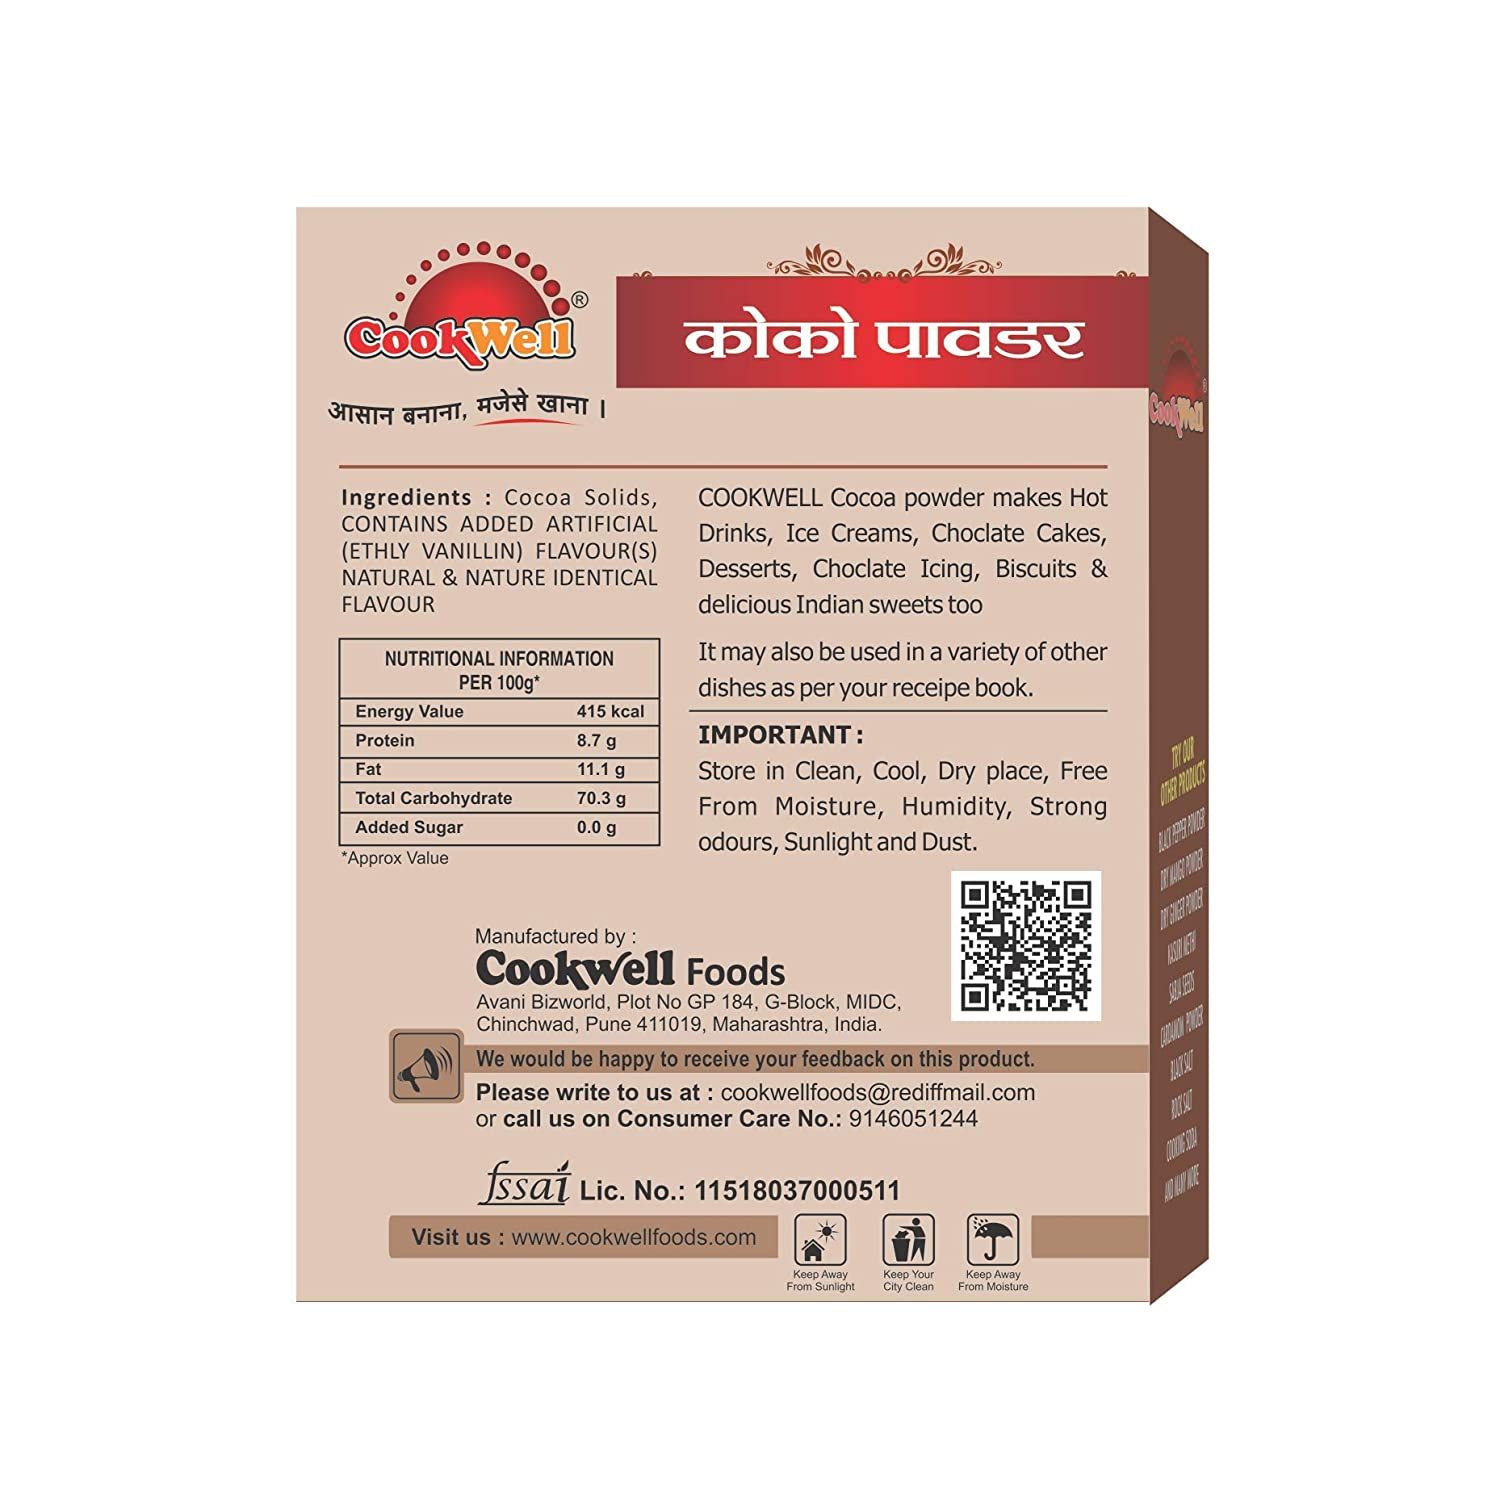 Cookwell Cocoa Powder Image